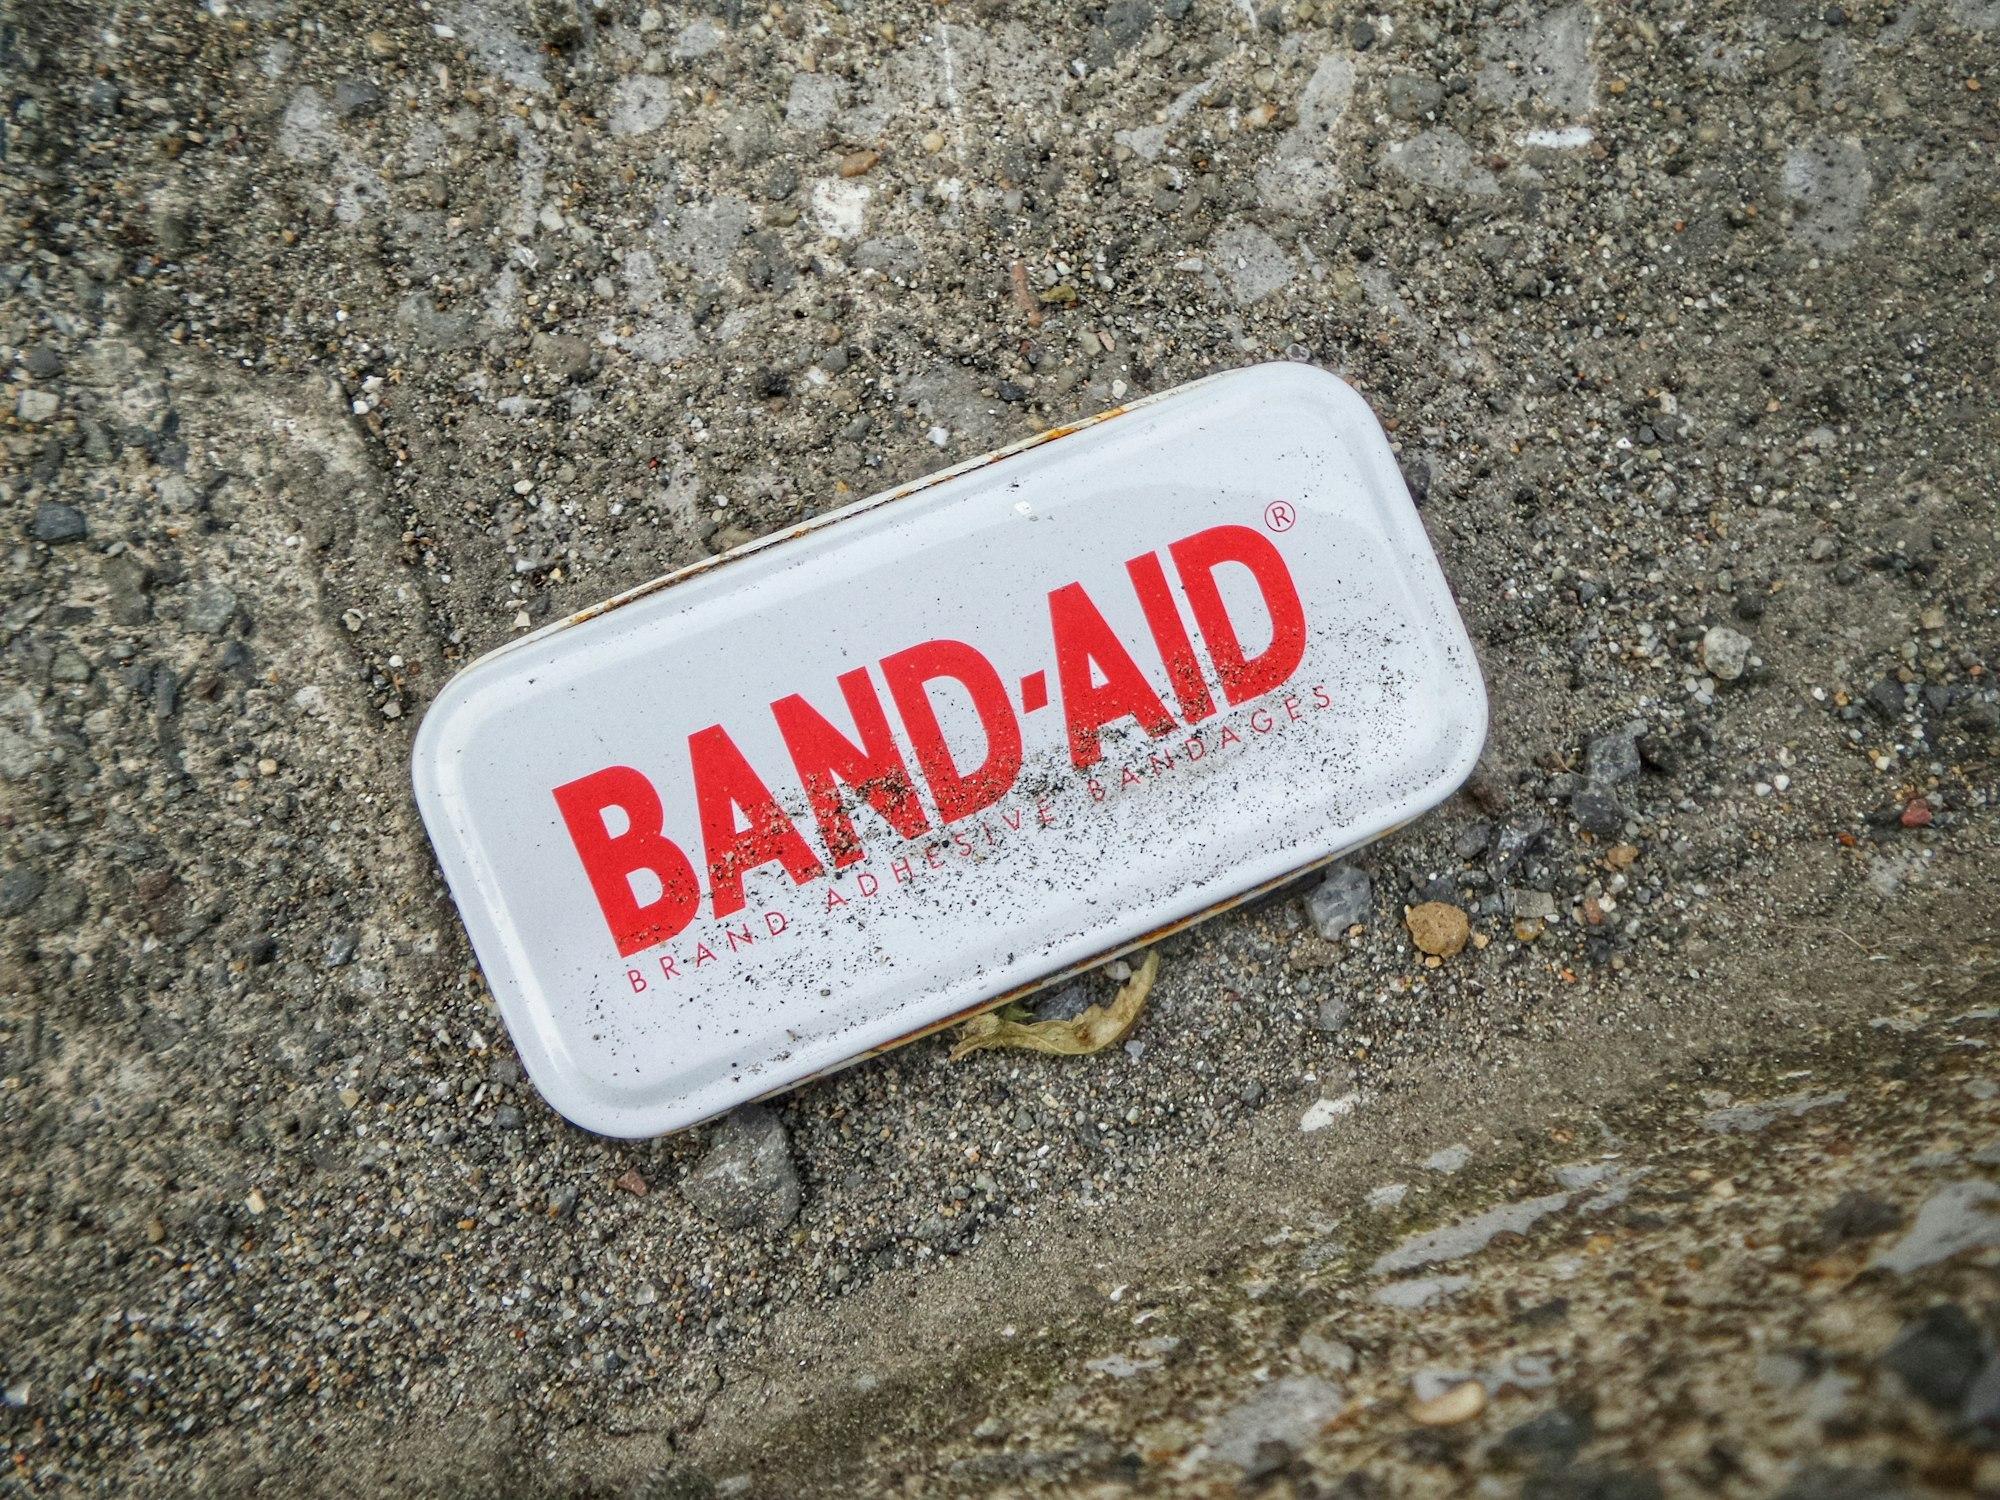 A container of "Band-Aid" bandages.